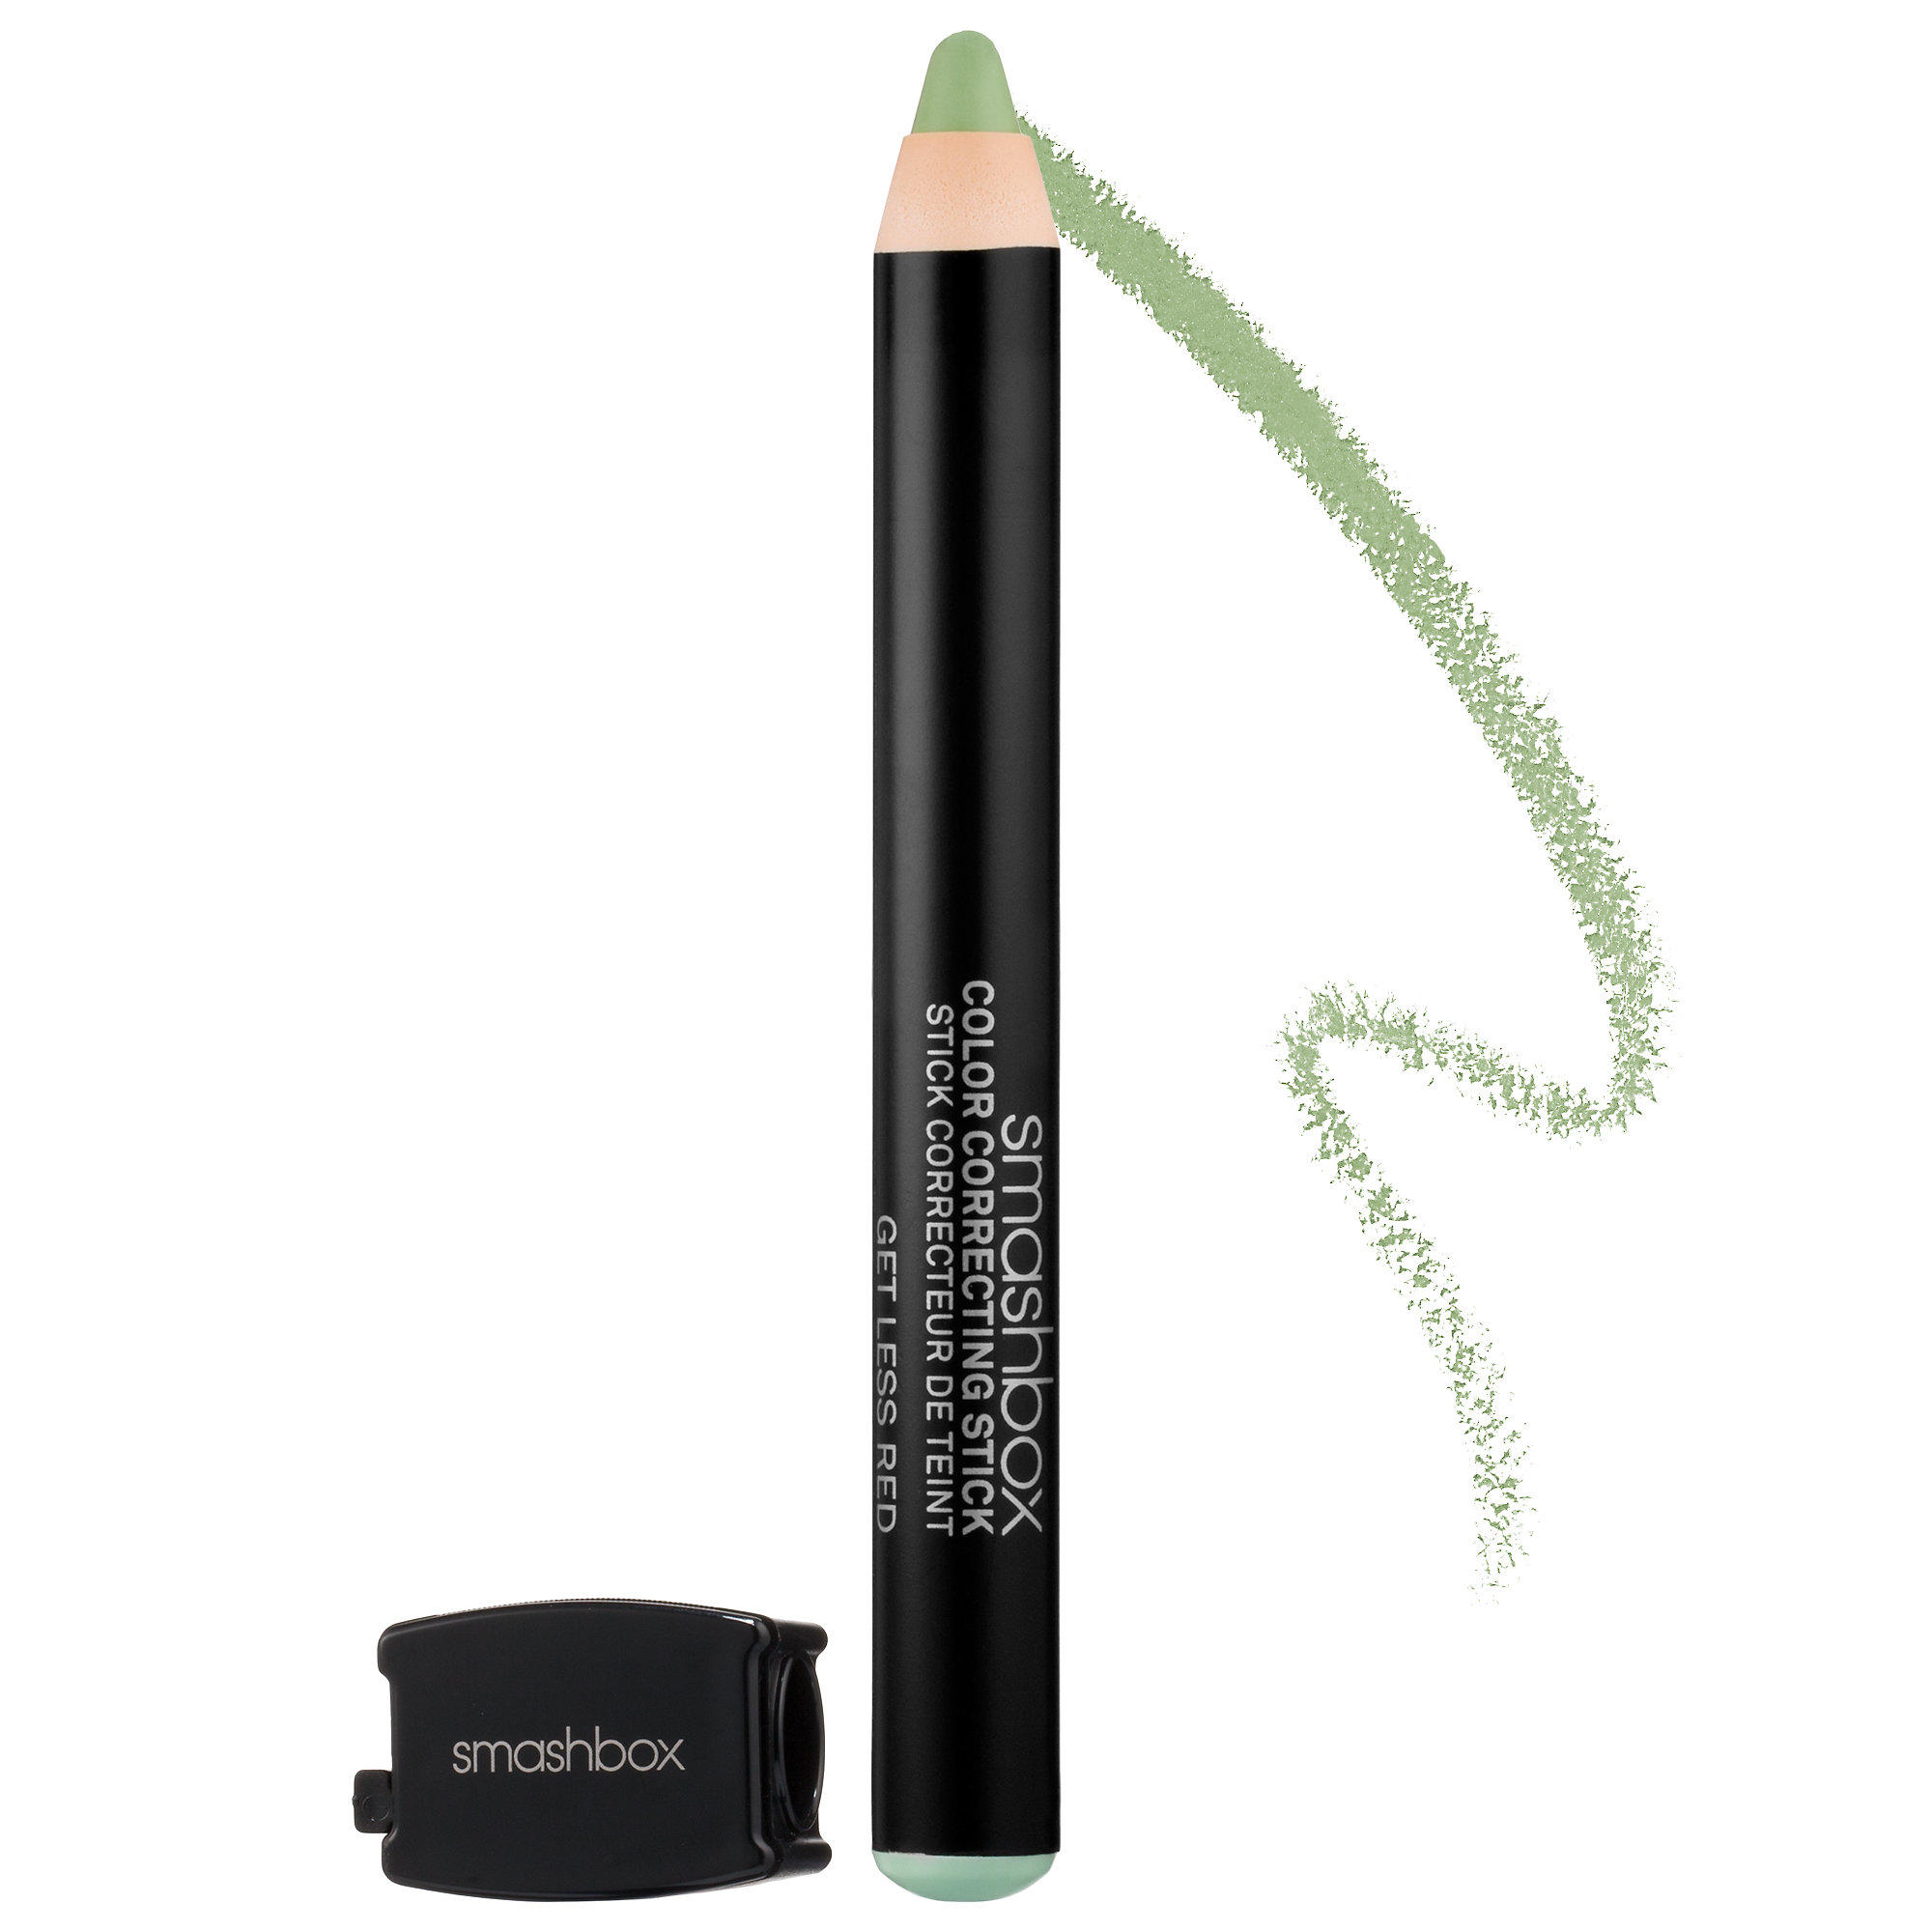 Smashbox Color Correcting Stick Get Less Red